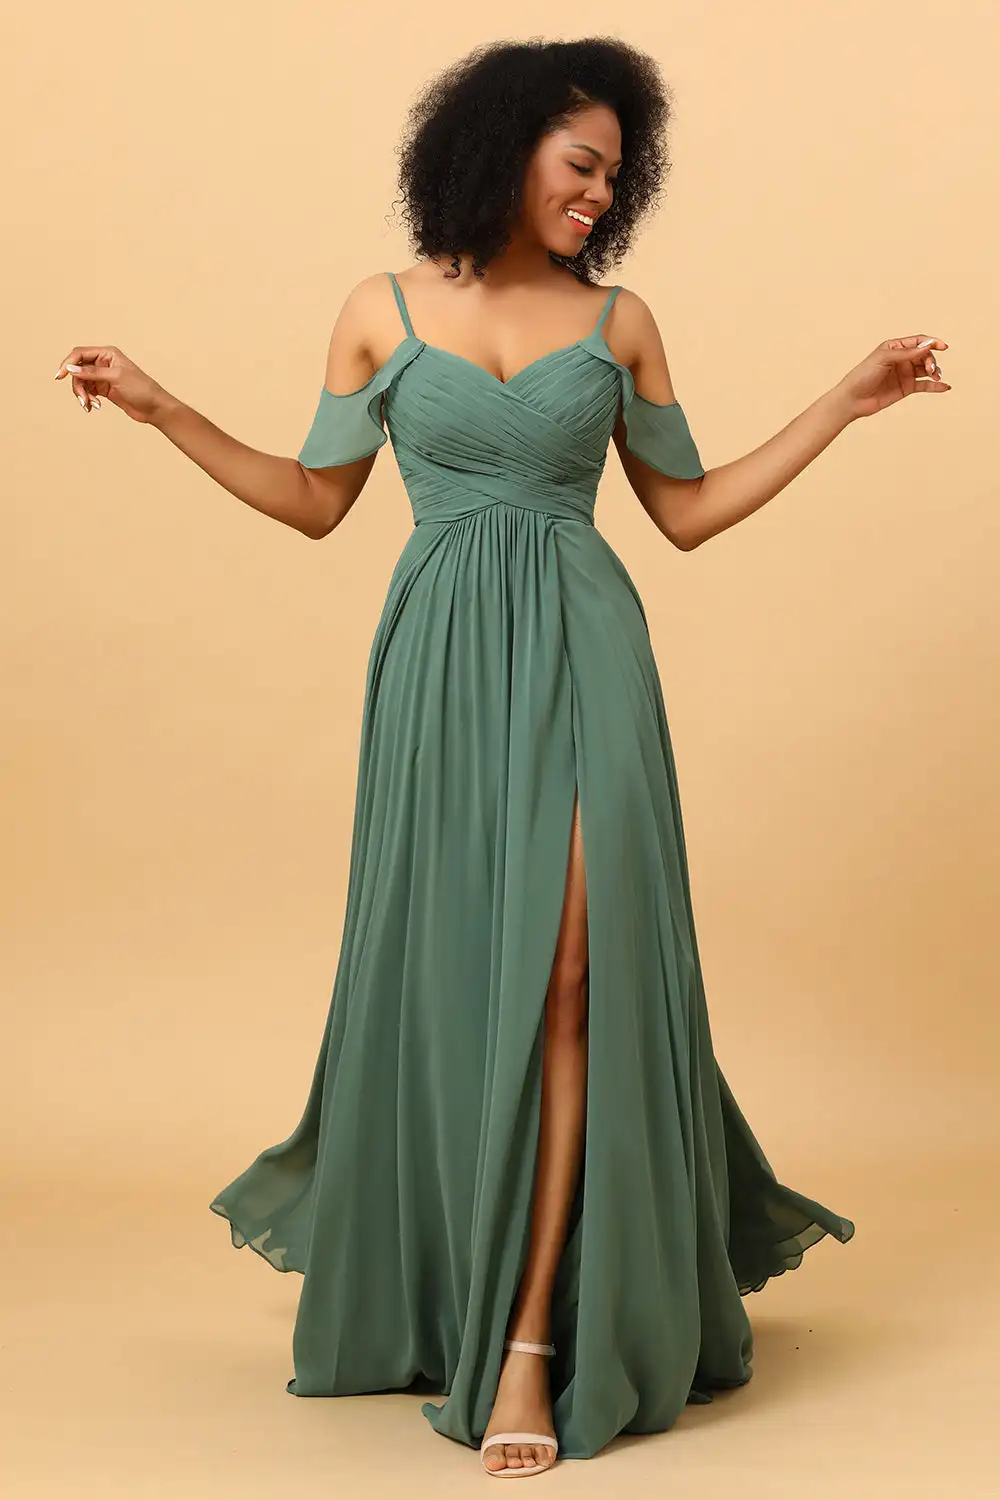 

A Line Off The Shoulder Long Chiffon Bridesmaid Dress With Slit Sleeveless Wedding Cocktail Dresses Floor-length Evening Gowns